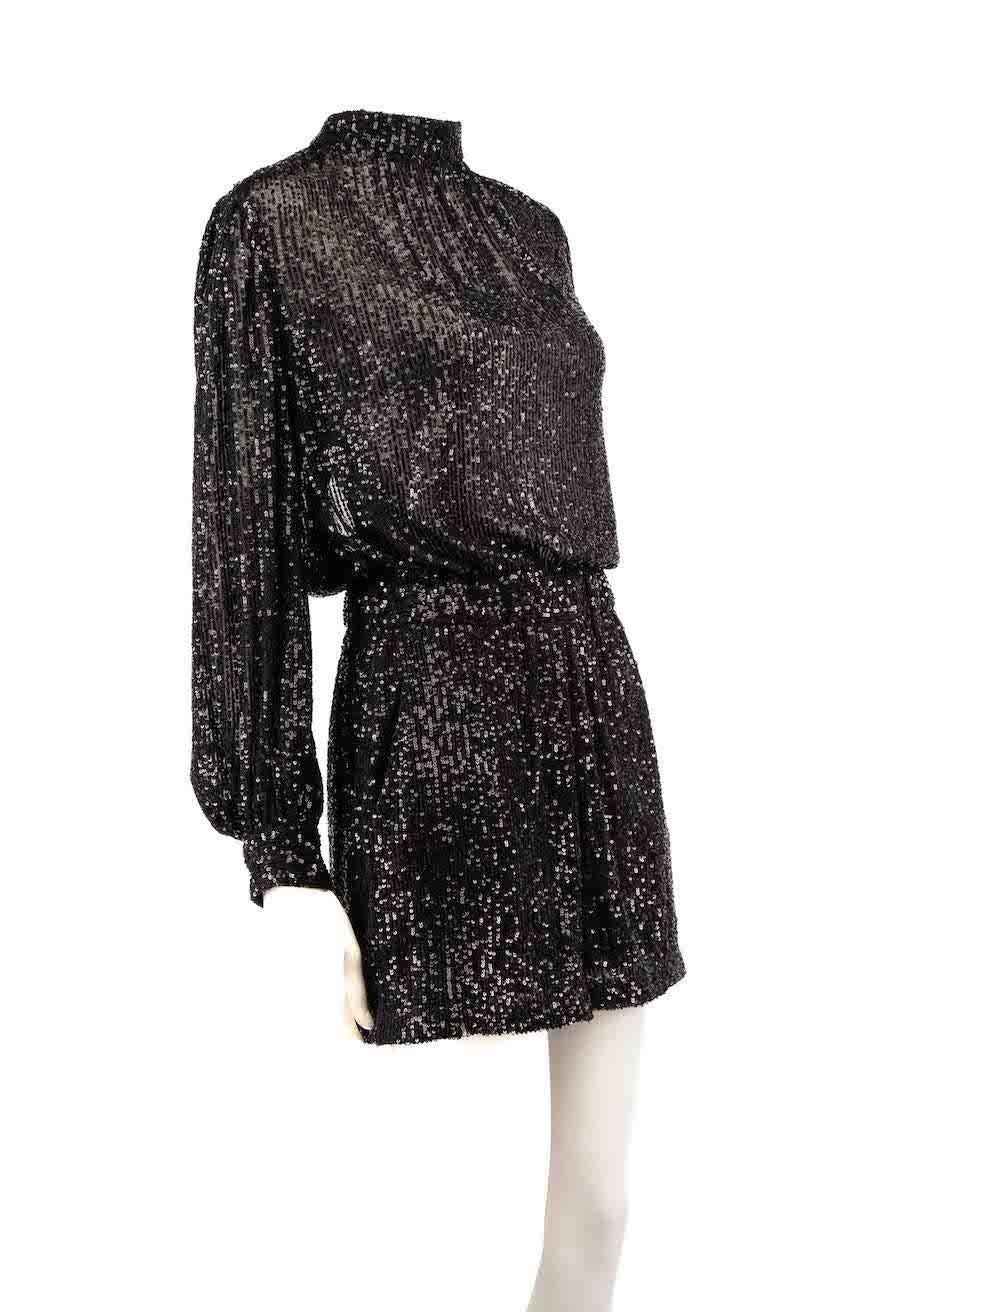 CONDITION is Very good. Minimal wear to playsuit is evident. Minimal wear to the front, back and sleeves with loose threads on this used Maje designer resale item.
 
 
 
 Details
 
 
 Black
 
 Polyester
 
 Playsuit
 
 Sequinned embellished
 
 Back